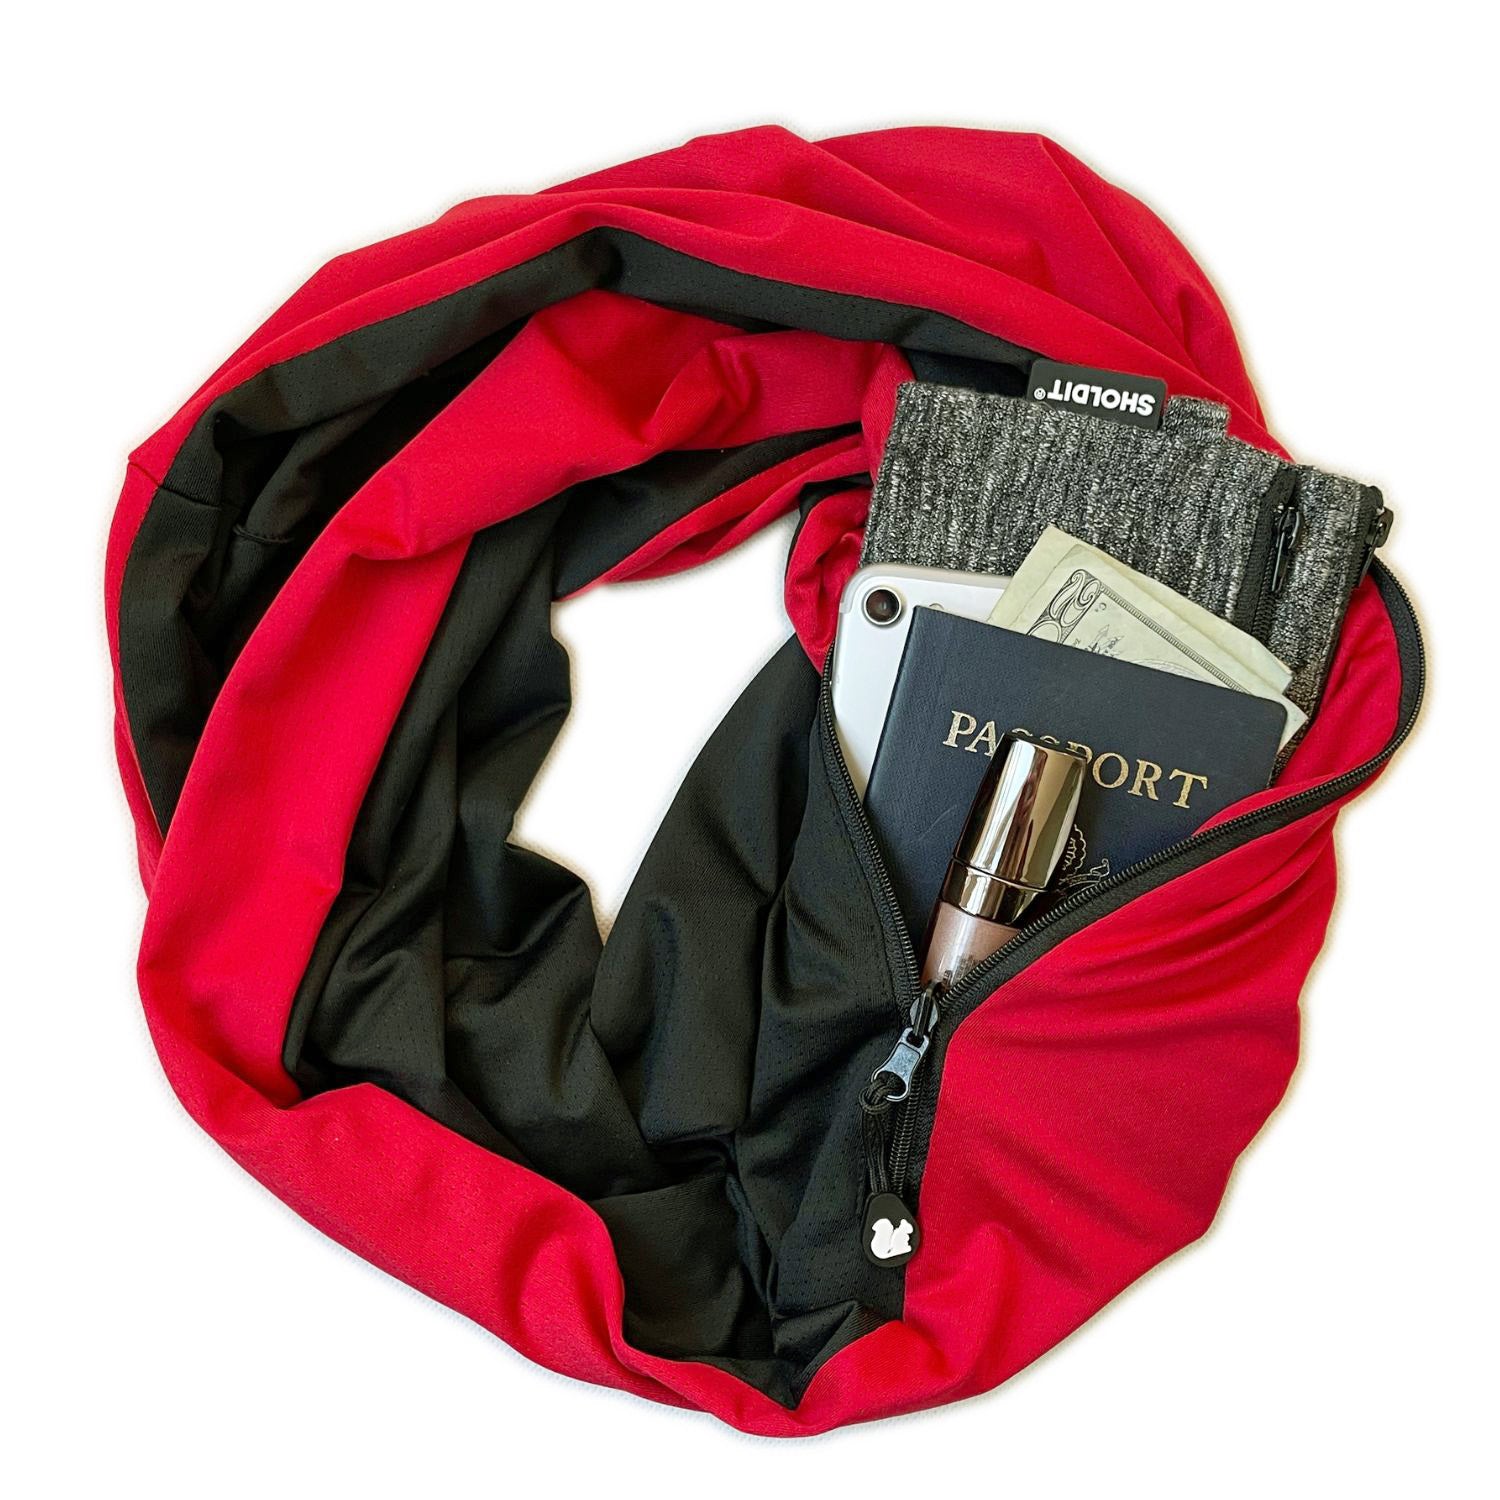 SHOLDIT Convertible Infinity Scarf with Pocket Red Twist with items in pocket